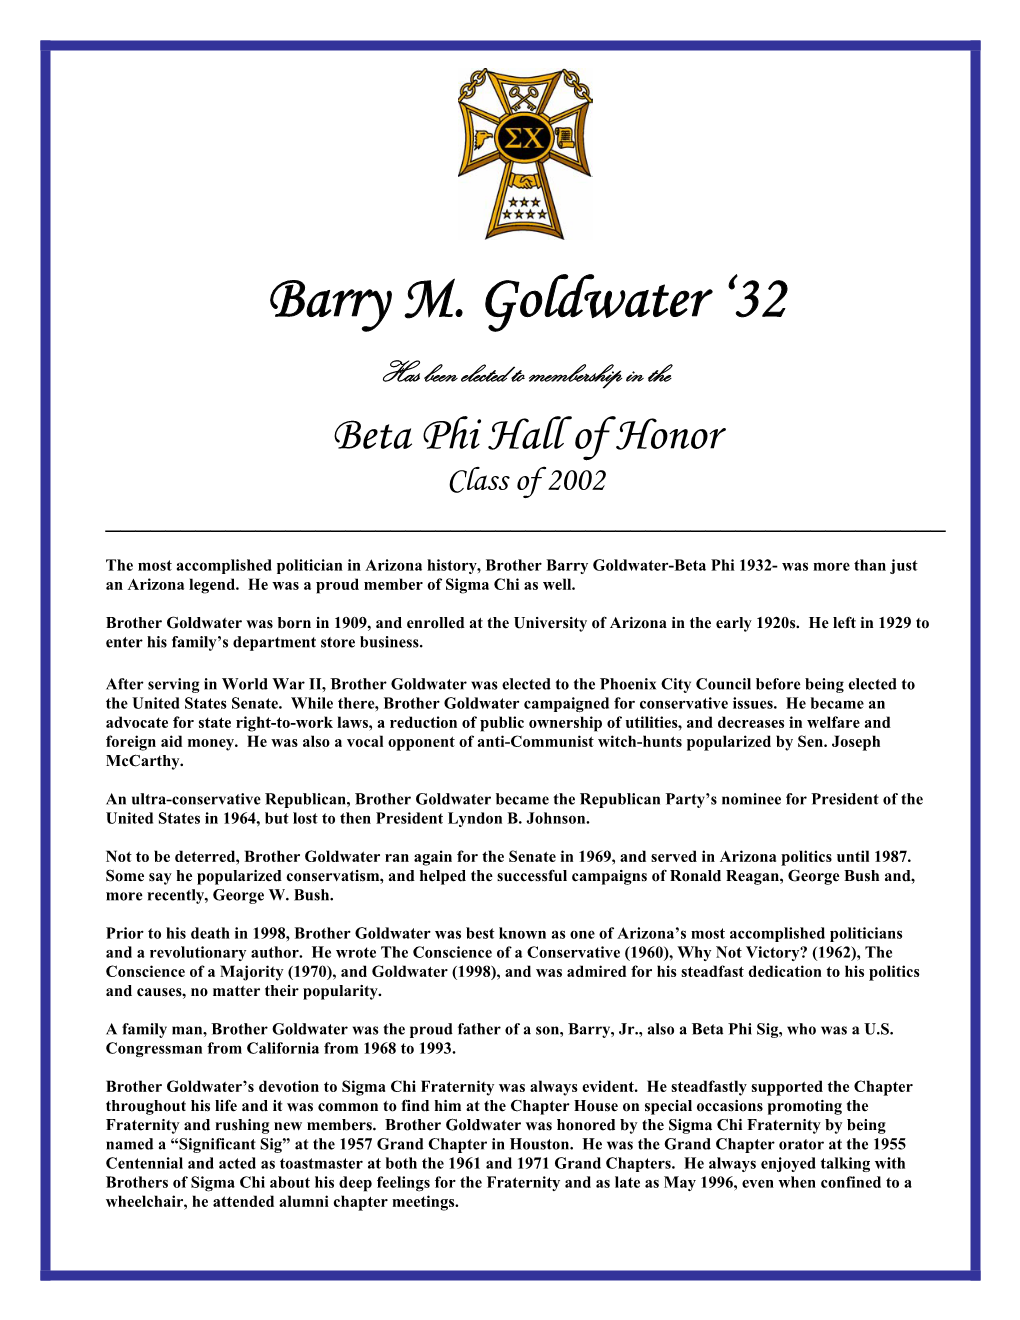 Barry M. Goldwater ‘32